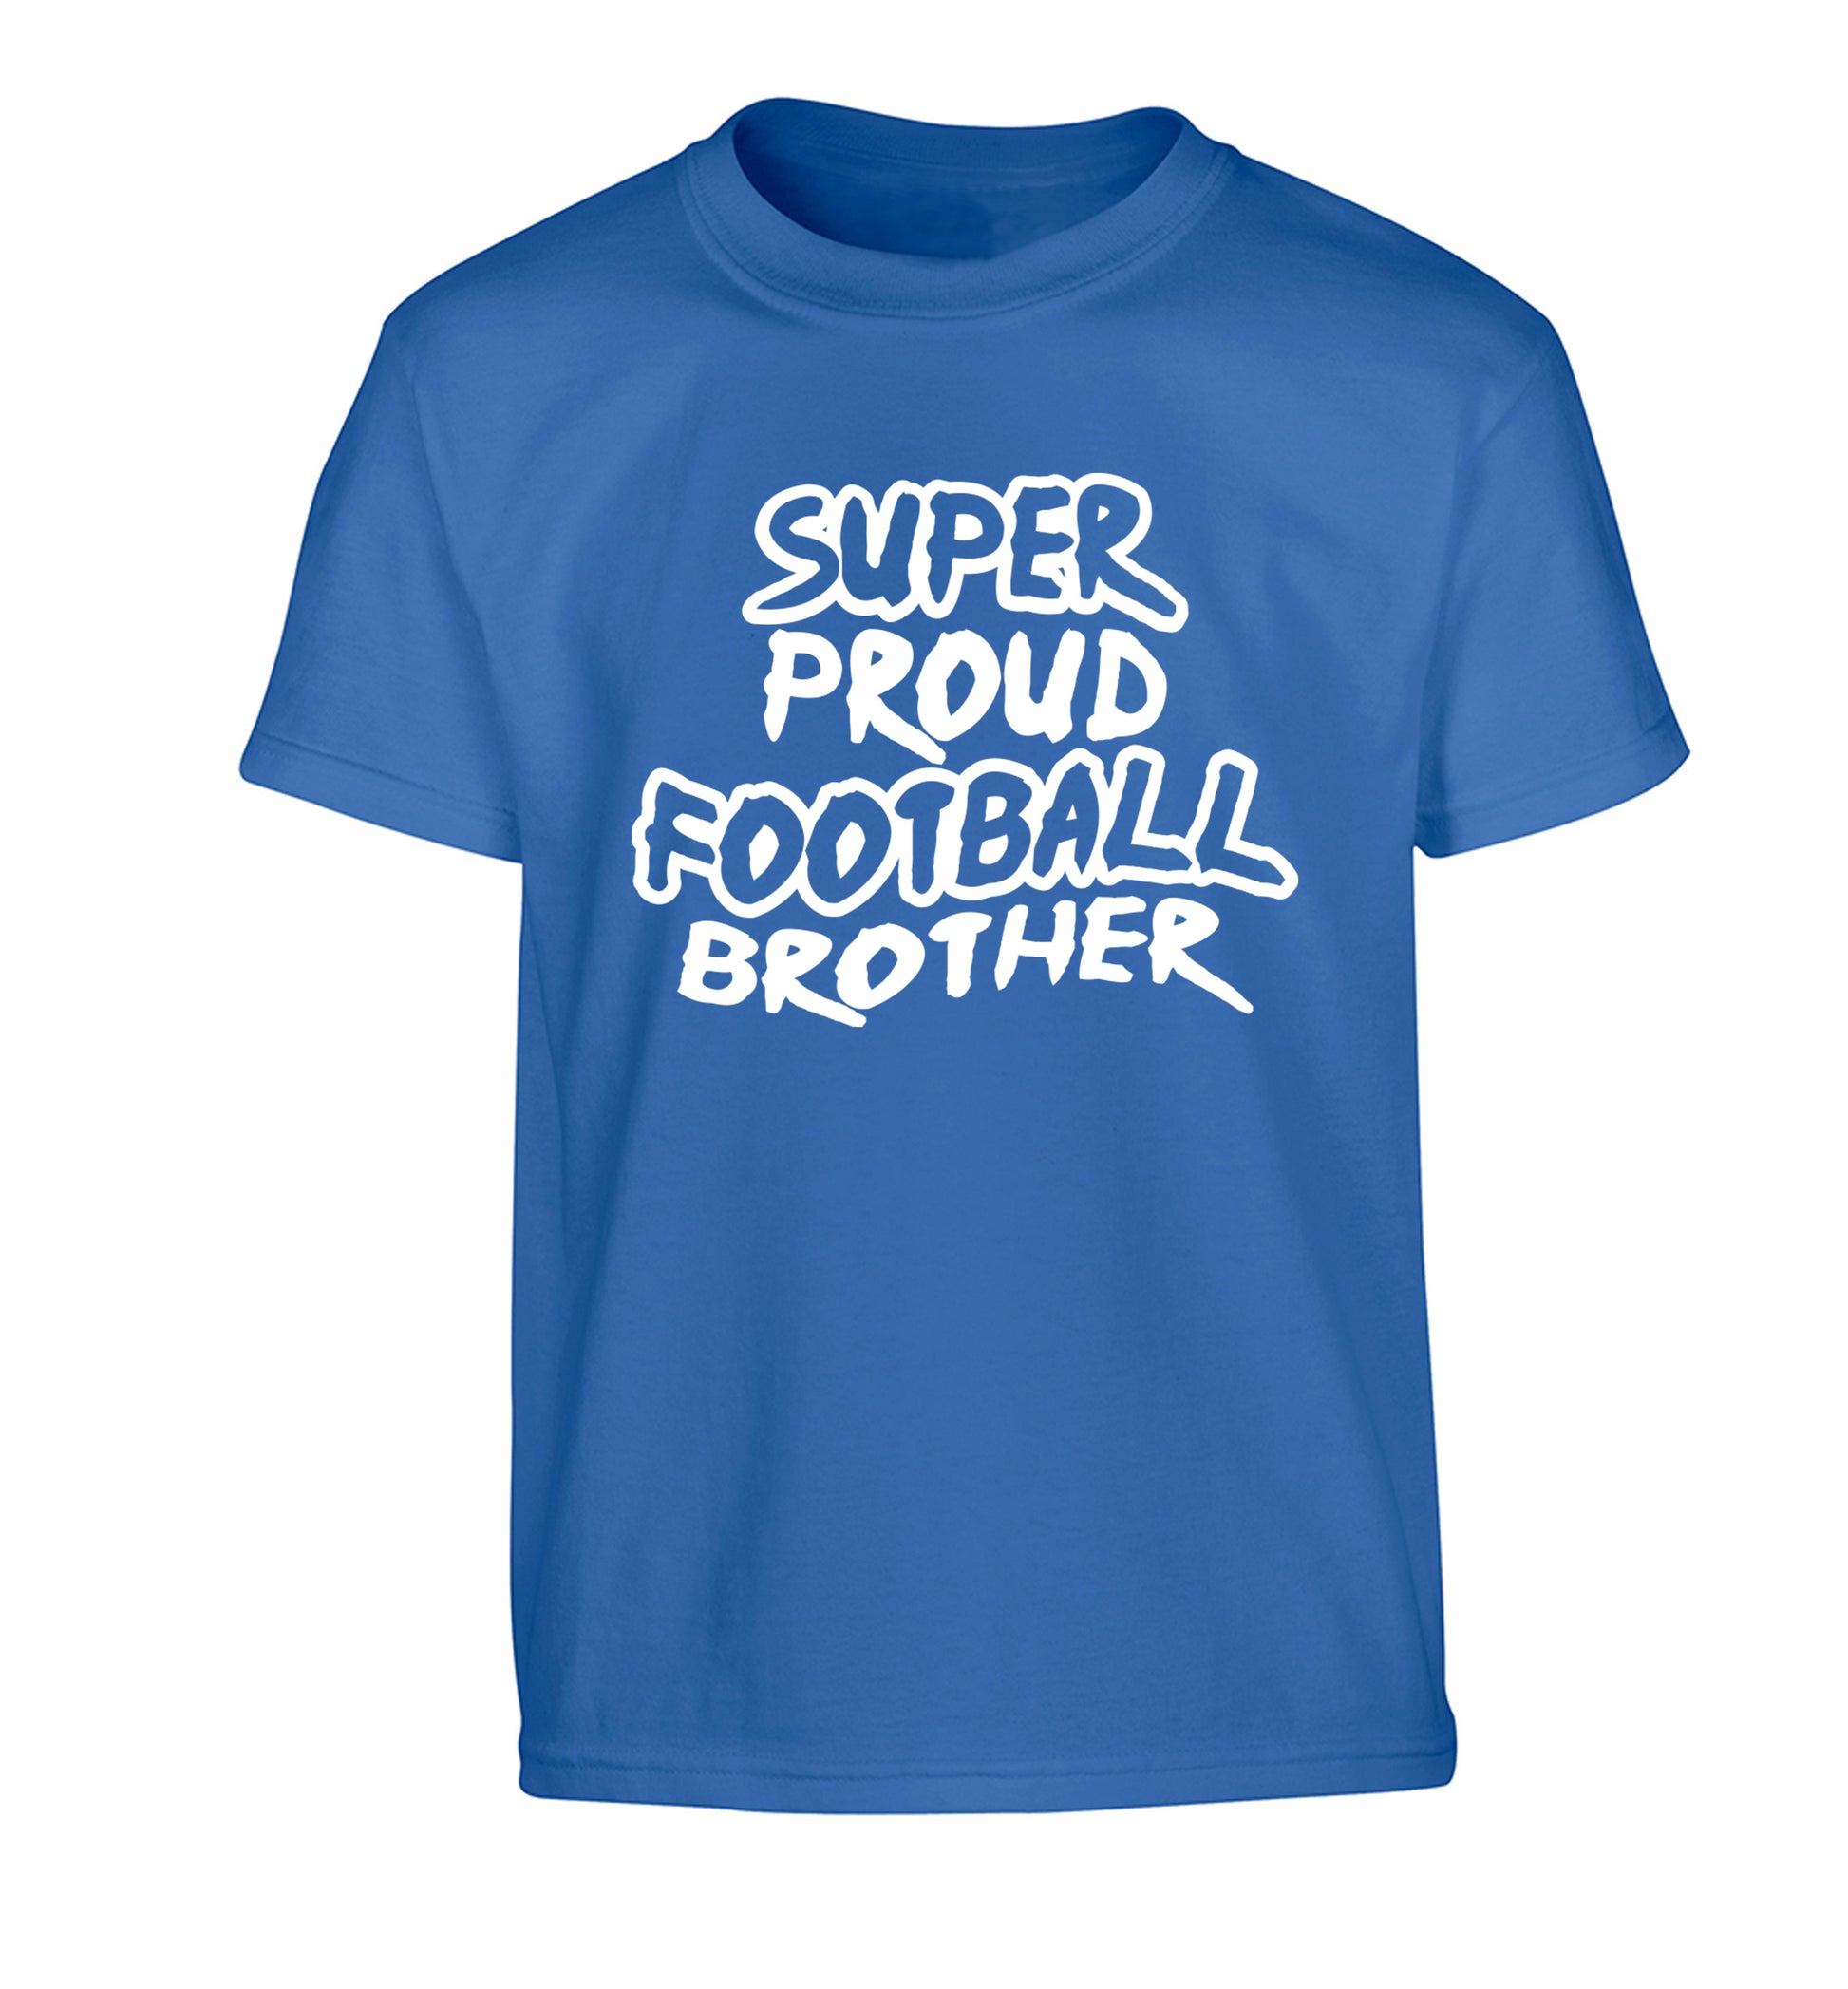 Super proud football brother Children's blue Tshirt 12-14 Years